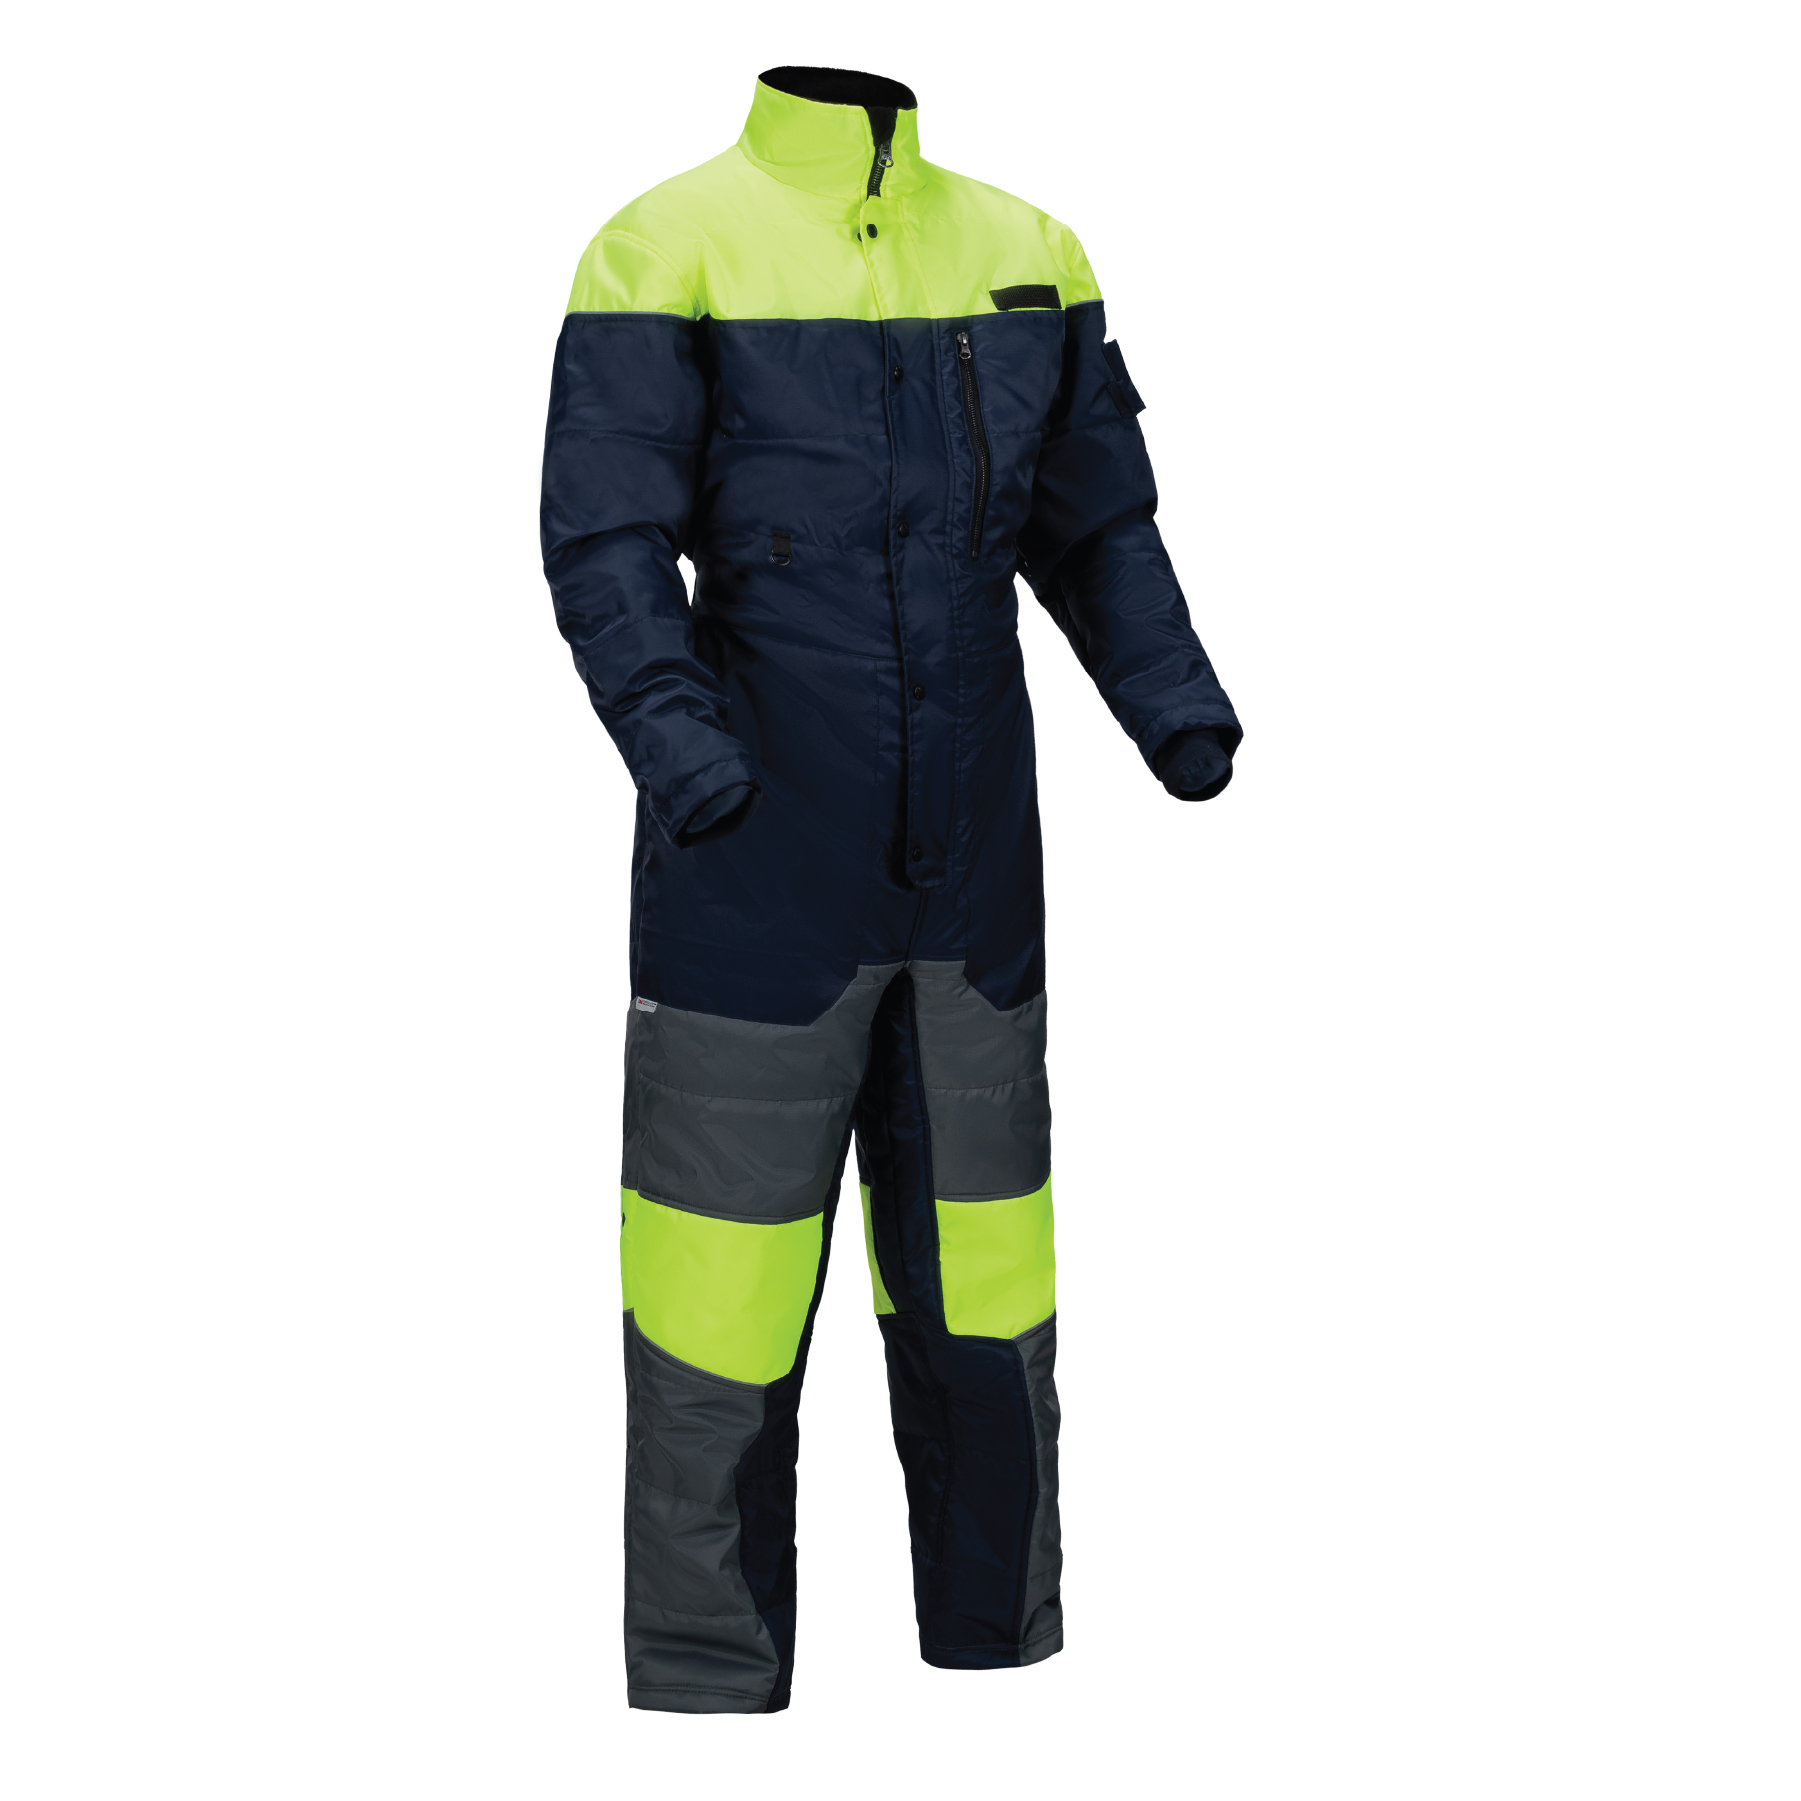 https://www.ergodyne.com/sites/default/files/product-images/41241-6475-insulated-freezer-coveralls-main-xs-navy.jpg